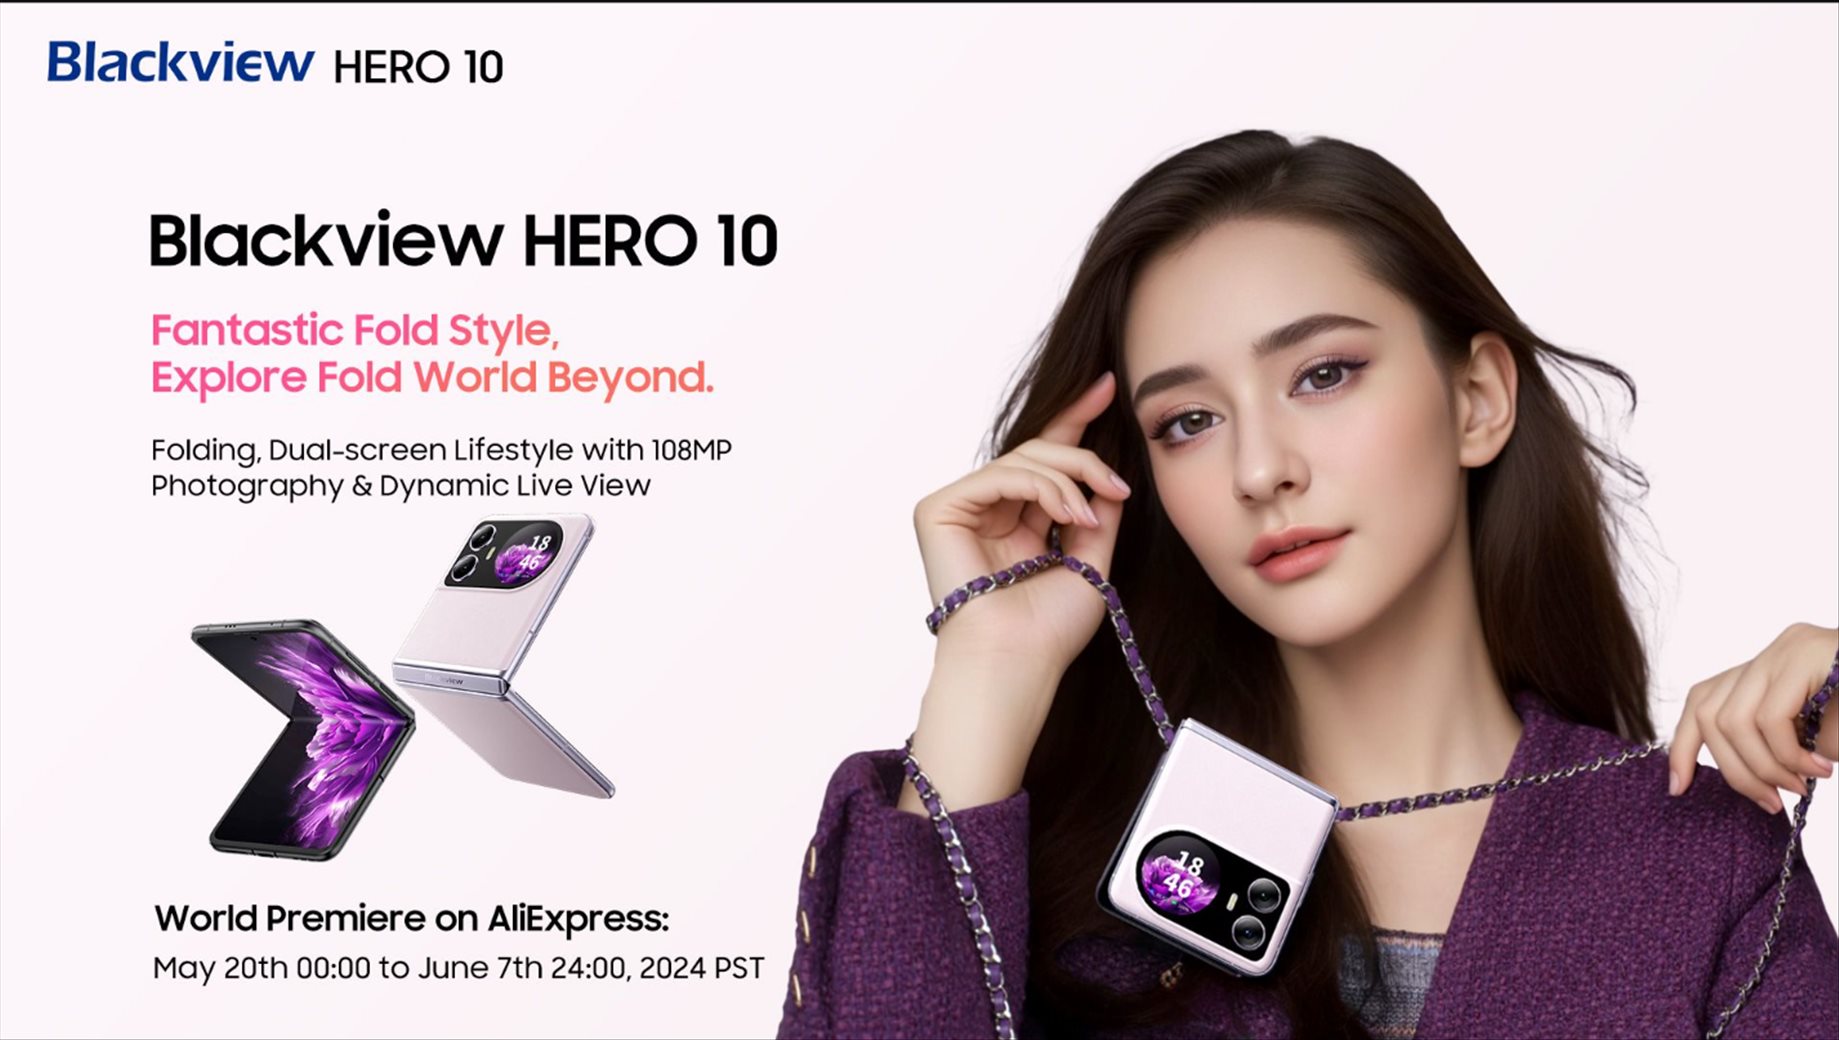 Blackview HERO 10 Globally Launches on AliExpress with Dual Screens, 108MP Camera & Android Dynamic Island! To Be the Cheapest Flip Phone!